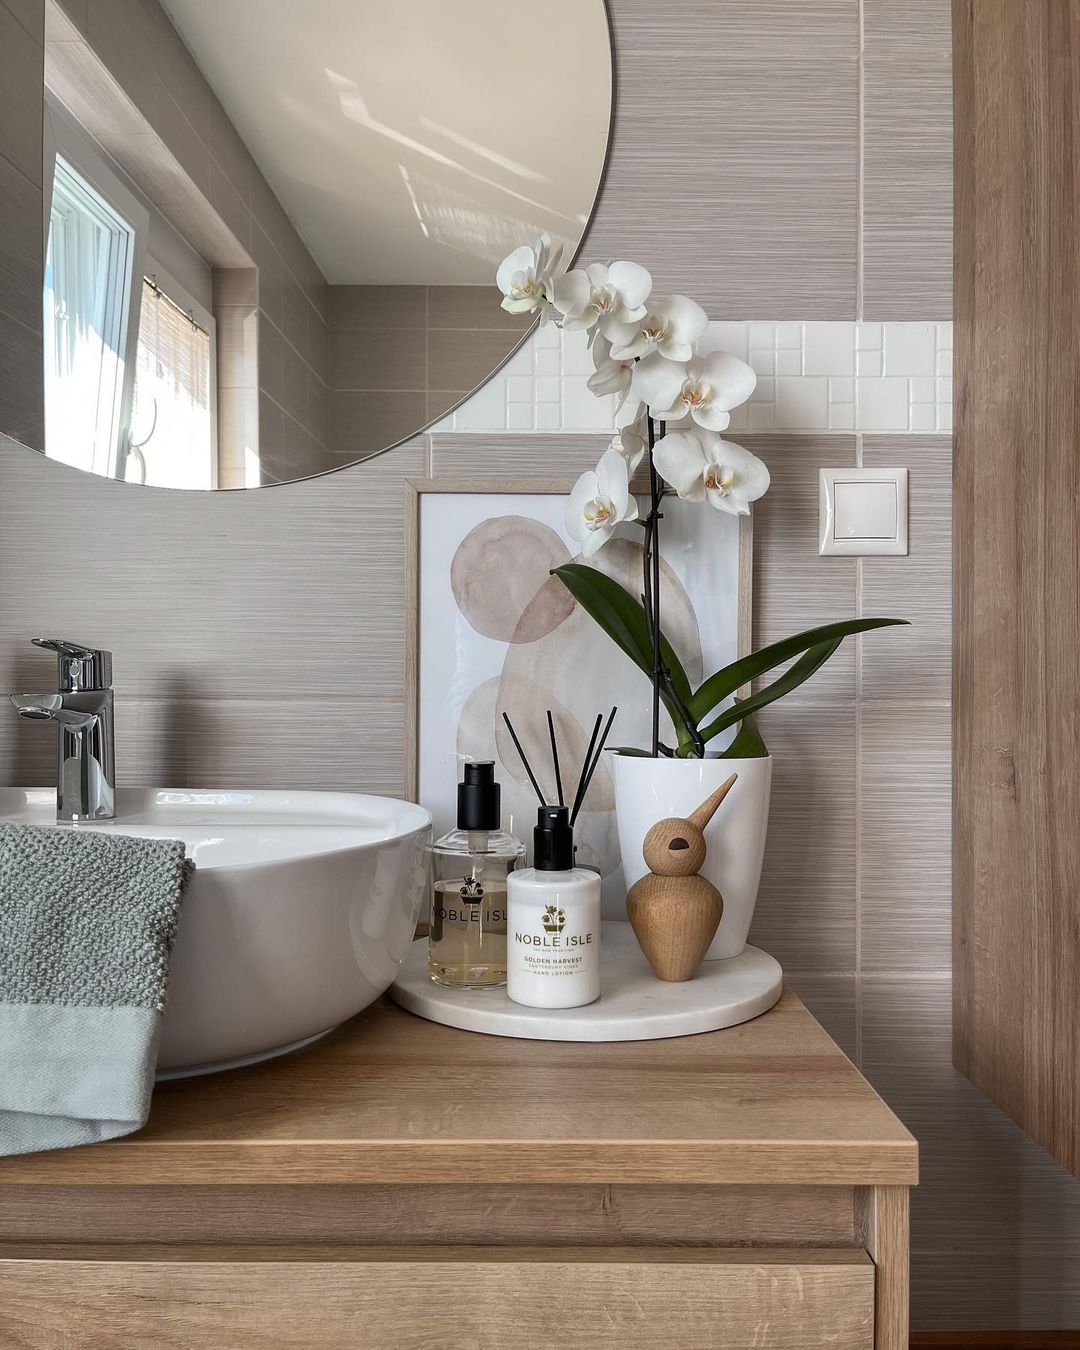 7 Ideas on How to Decorate the Bathroom Counter - Inspiration For Moms